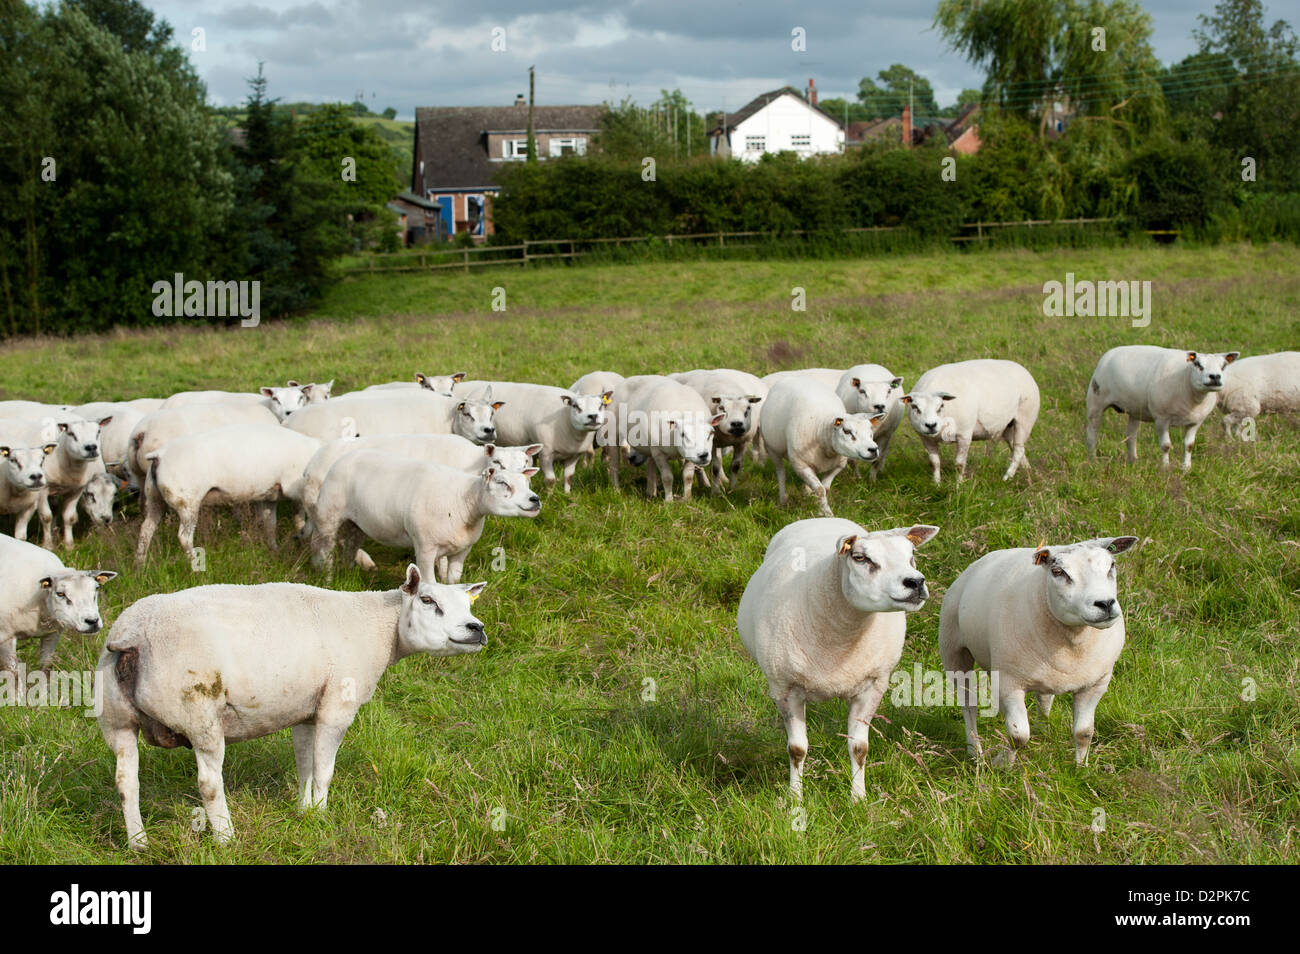 Flock of sheep in field next to rural village in the midlands, UK. Stock Photo